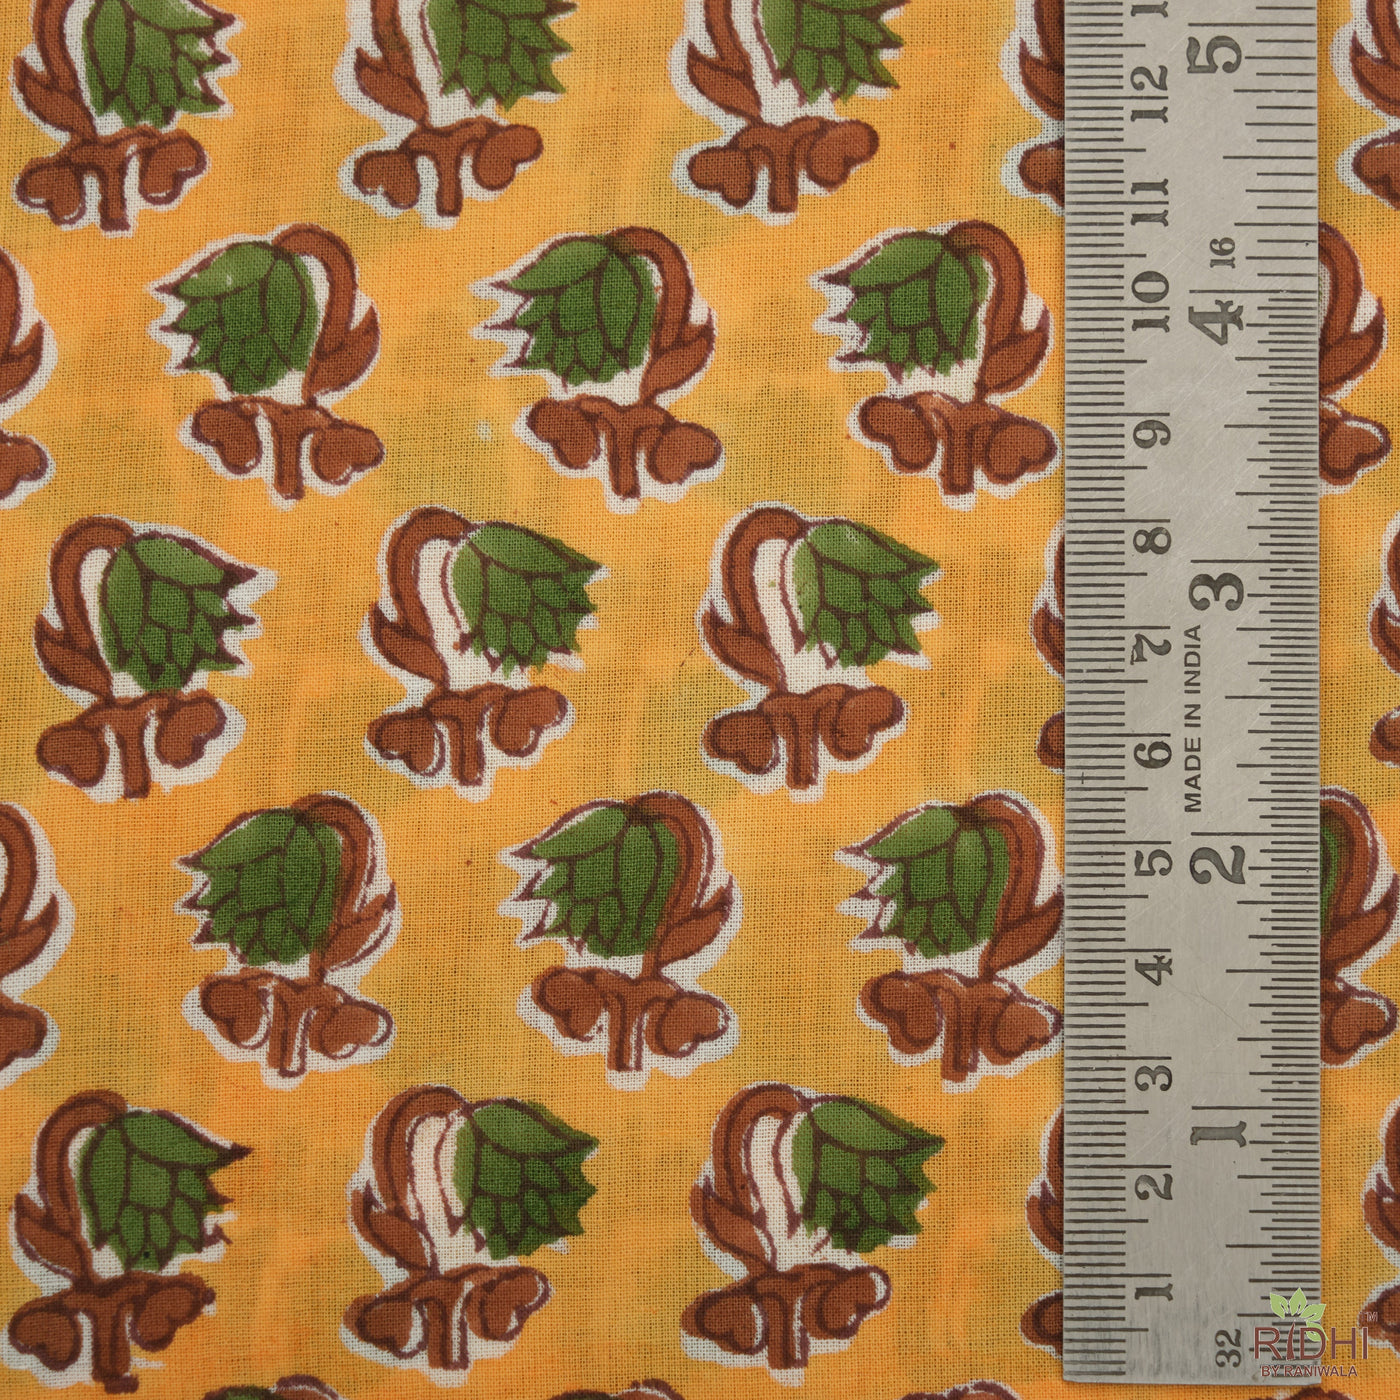 Yellow, Olive Green, Brown Indian Floral Hand Block Printed 100% Pure Cotton Cloth, Fabric by the yard, Women's Clothing Curtains Pillow Bag